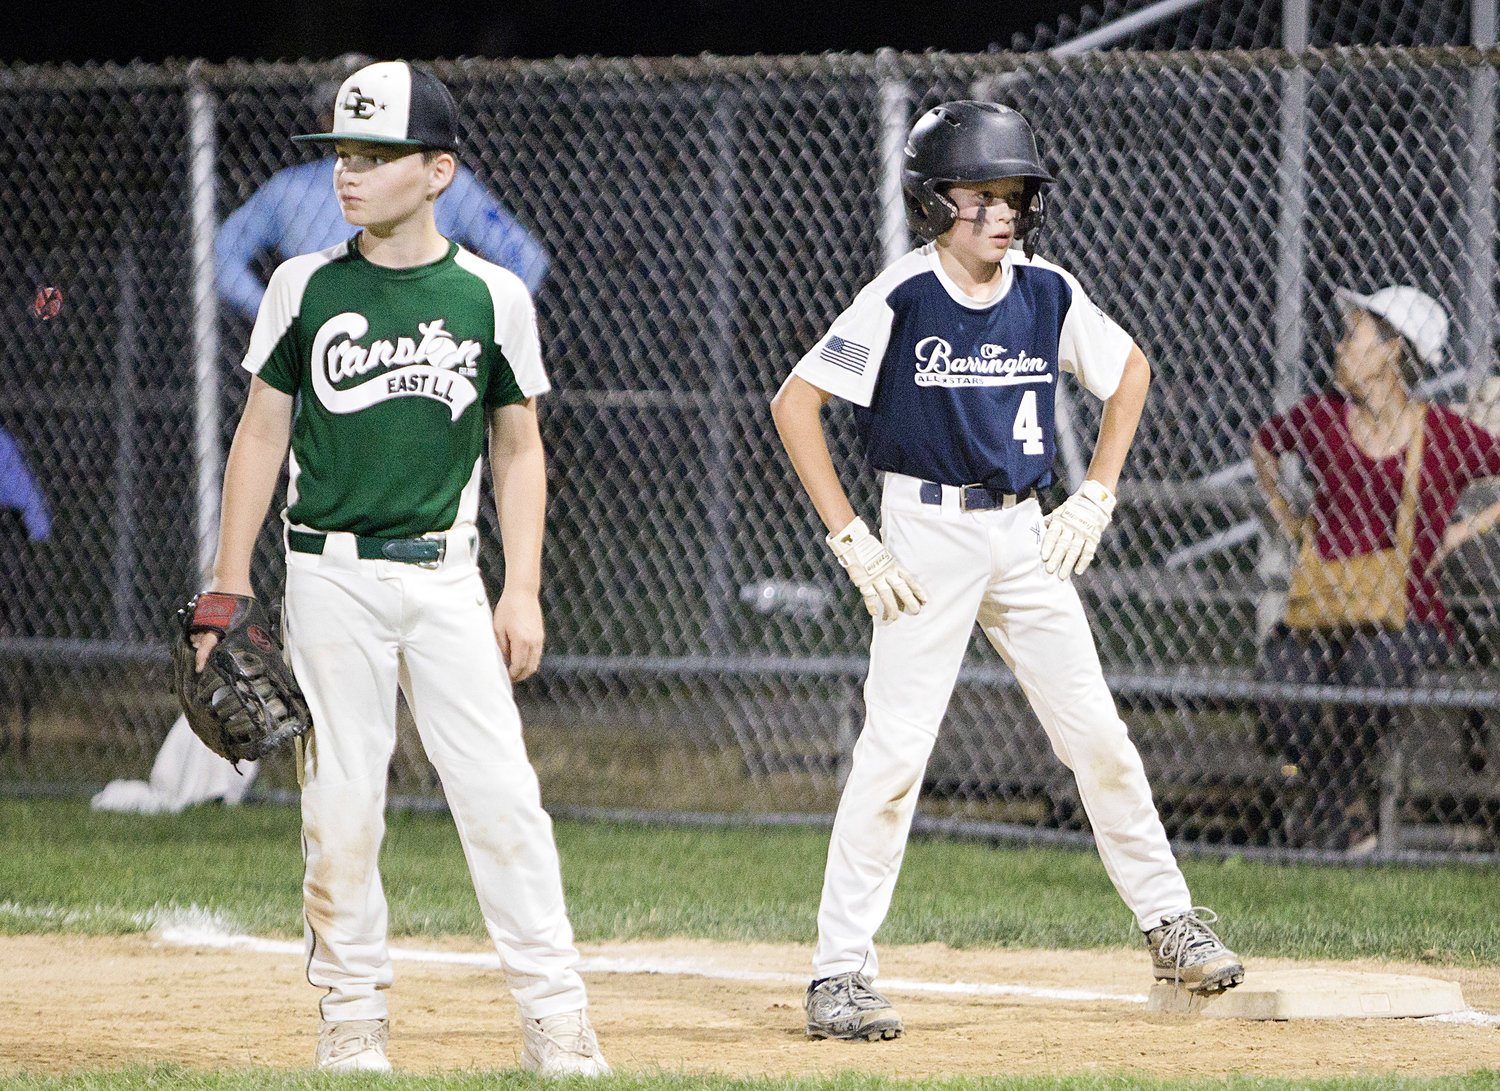 Zane Paller stands hopeful at first base while trailing Cranston East 4-1 in the sixth inning of an 11U All-Star State Tournament game, Wednesday.